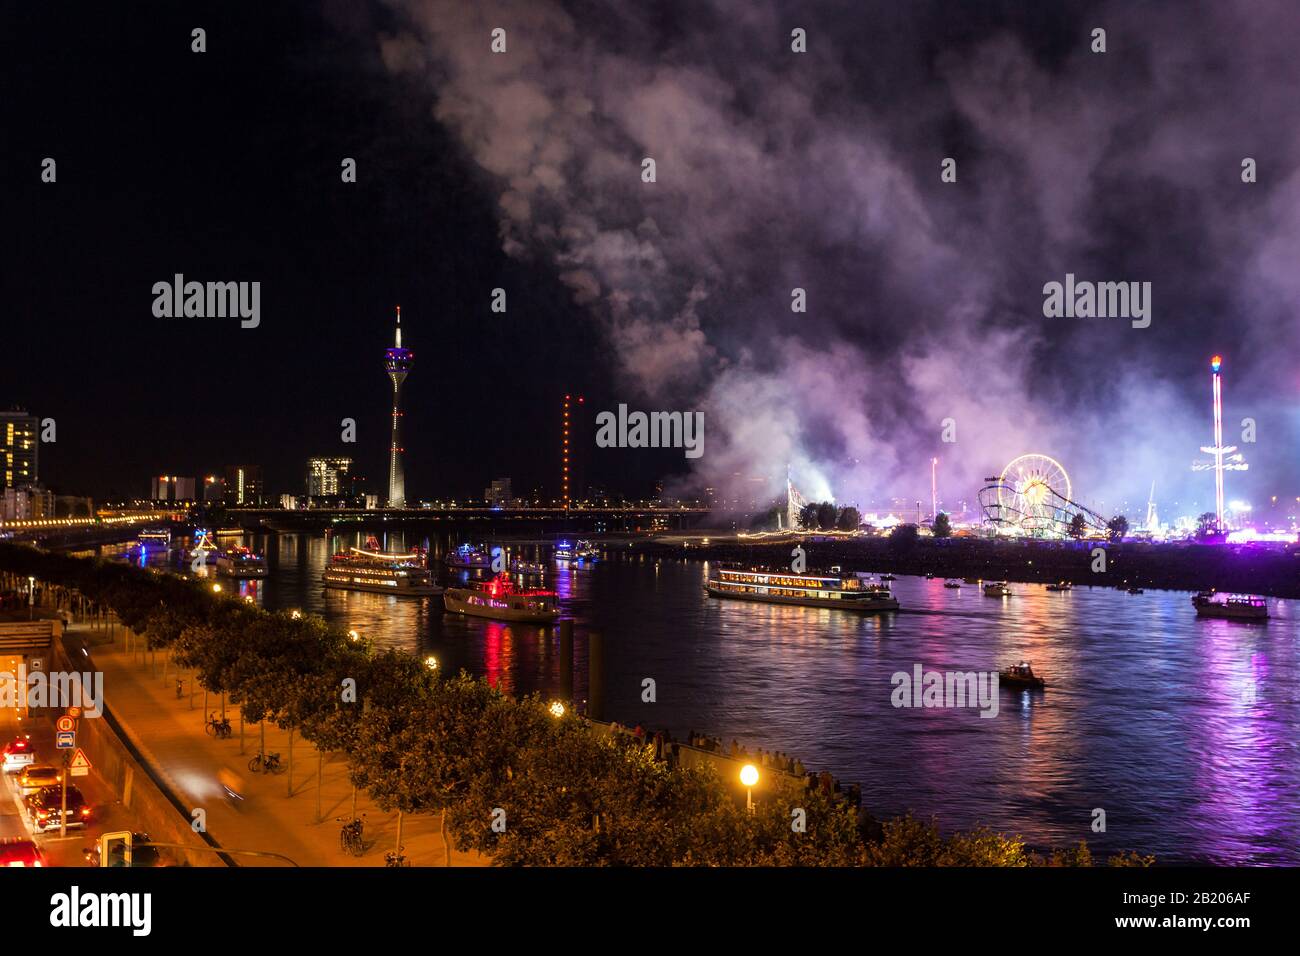 Pollution from the smoke of a large firework display during the Rhine fun fair Stock Photo